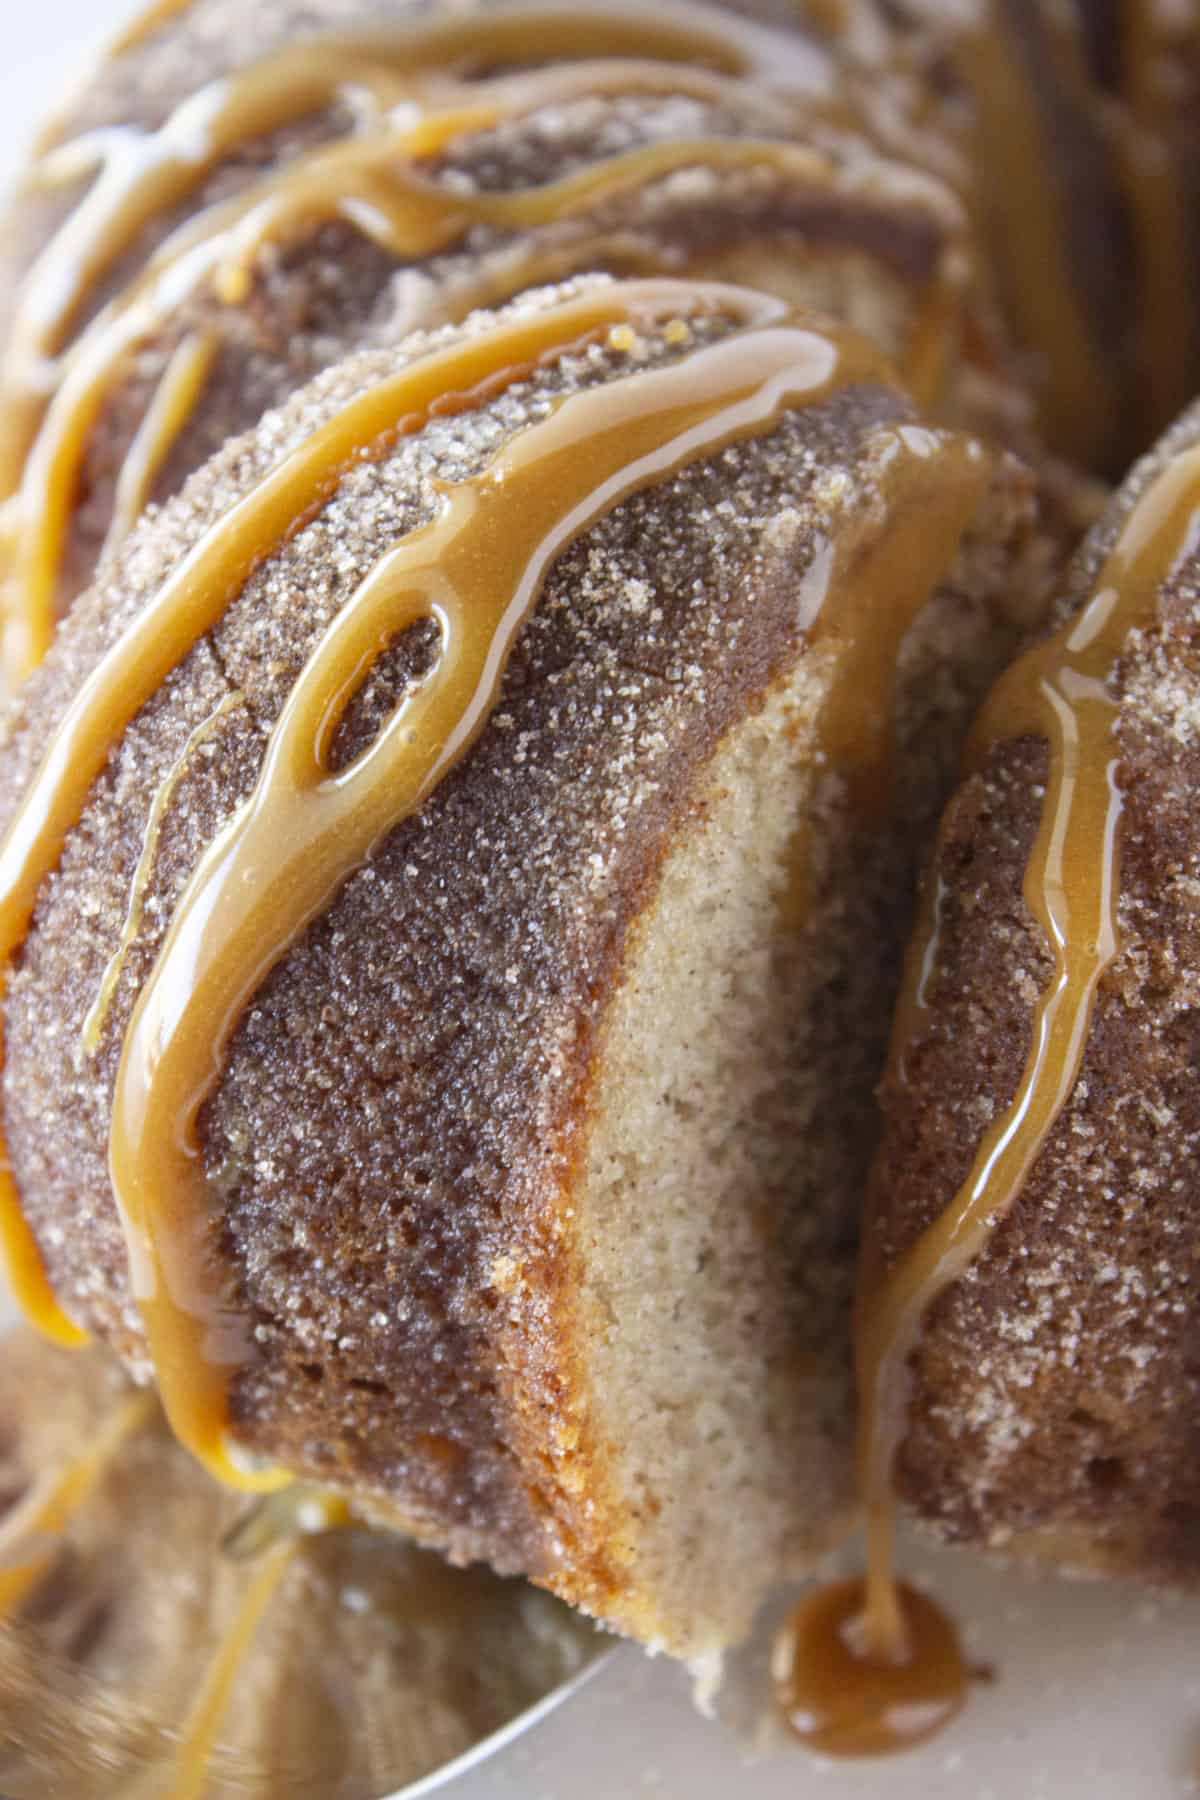 Serving a slice of churro bundt cake with caramel drizzled on top.